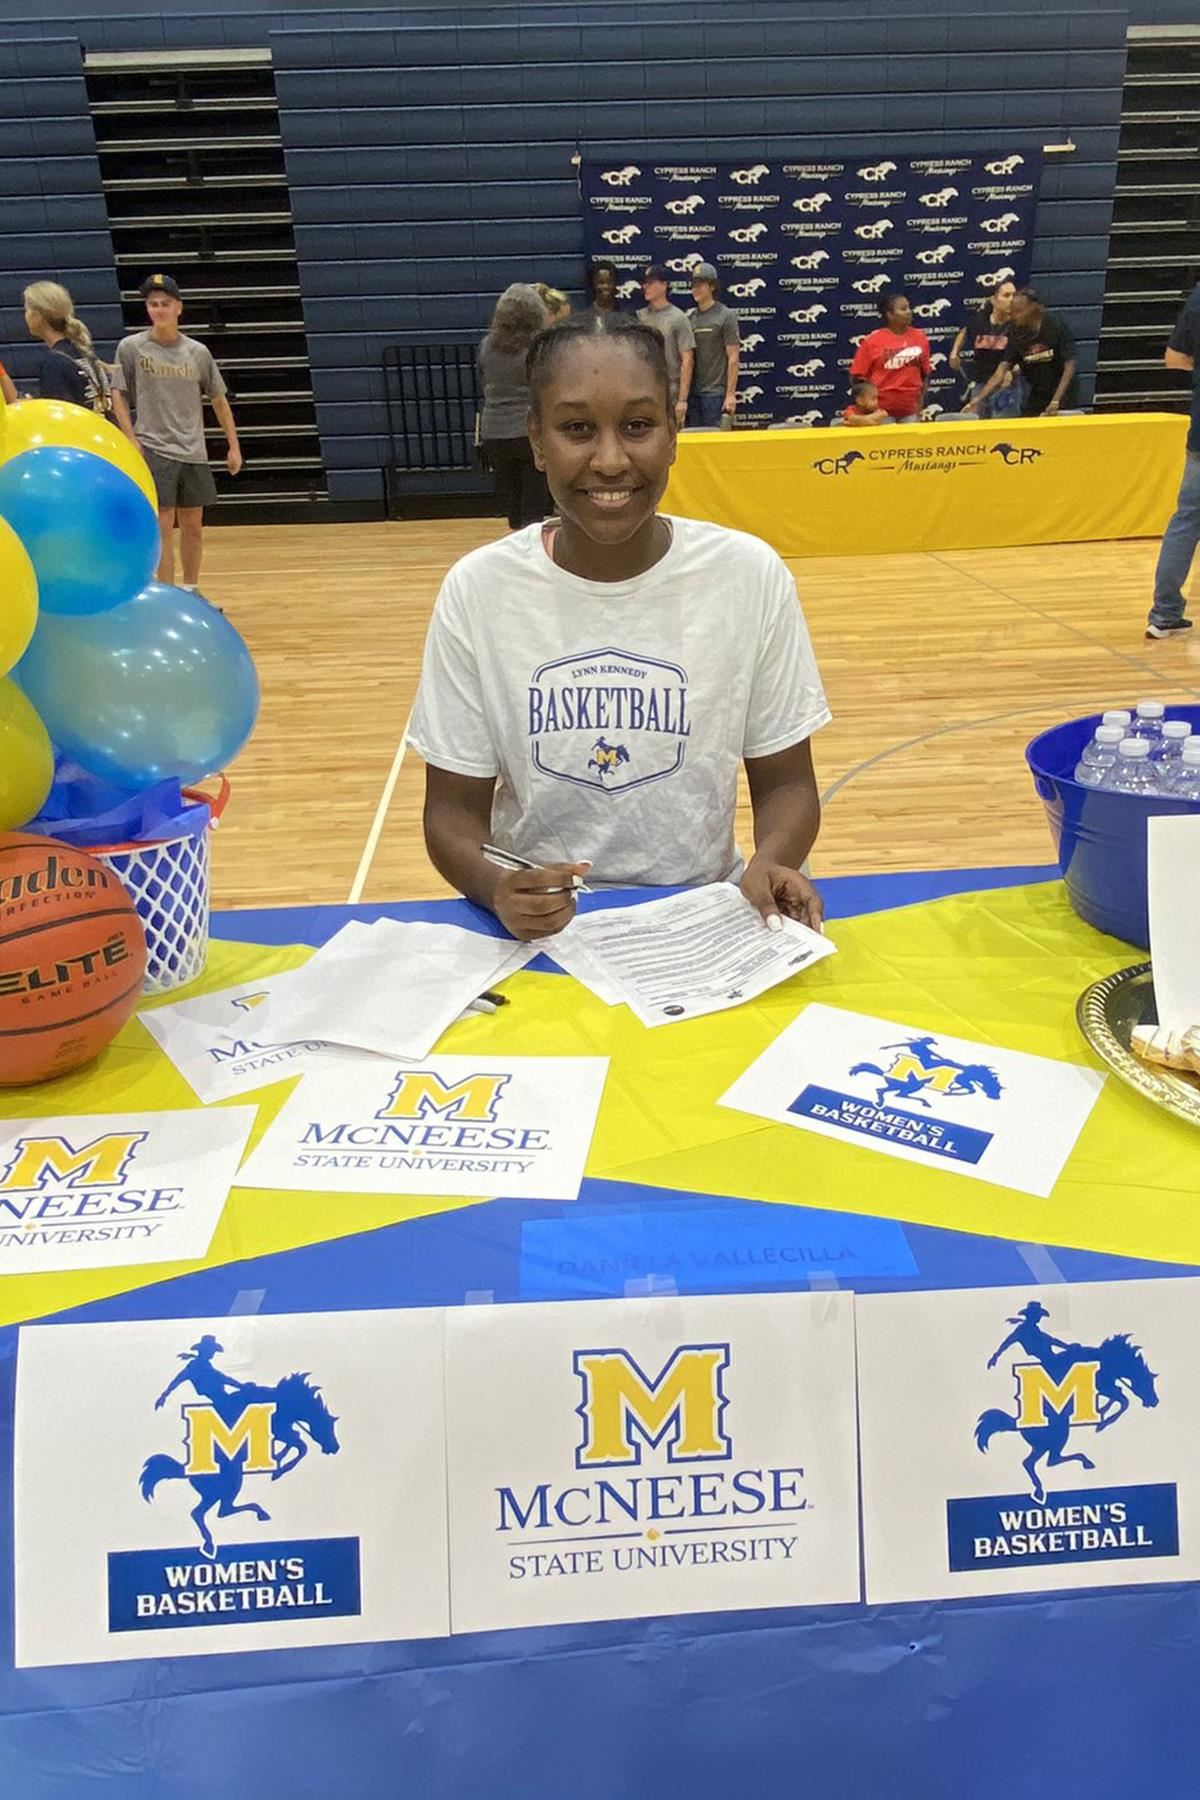 Cypress Ranch High School senior Daniela Vallecilla signed a letter of intent to play basketball at McNeese State University.